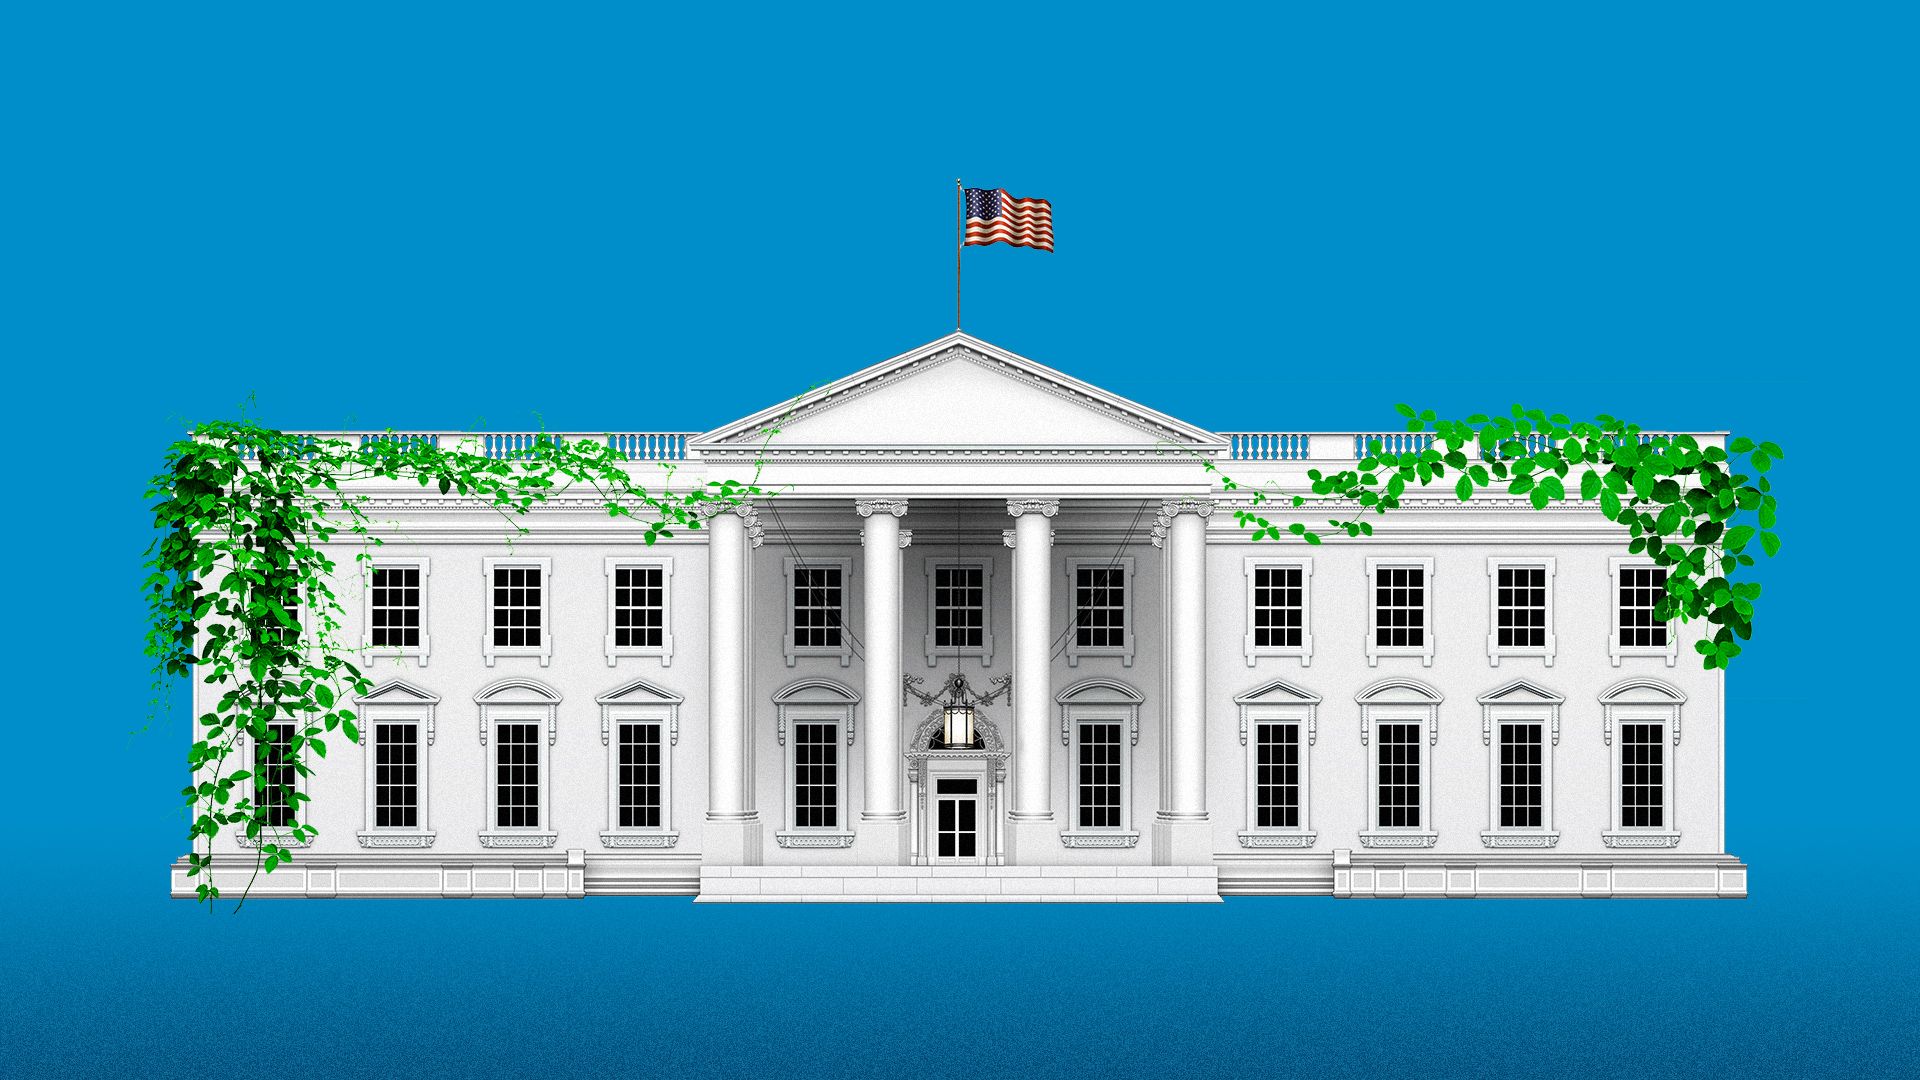 Illustration of the White House covered in vines. 